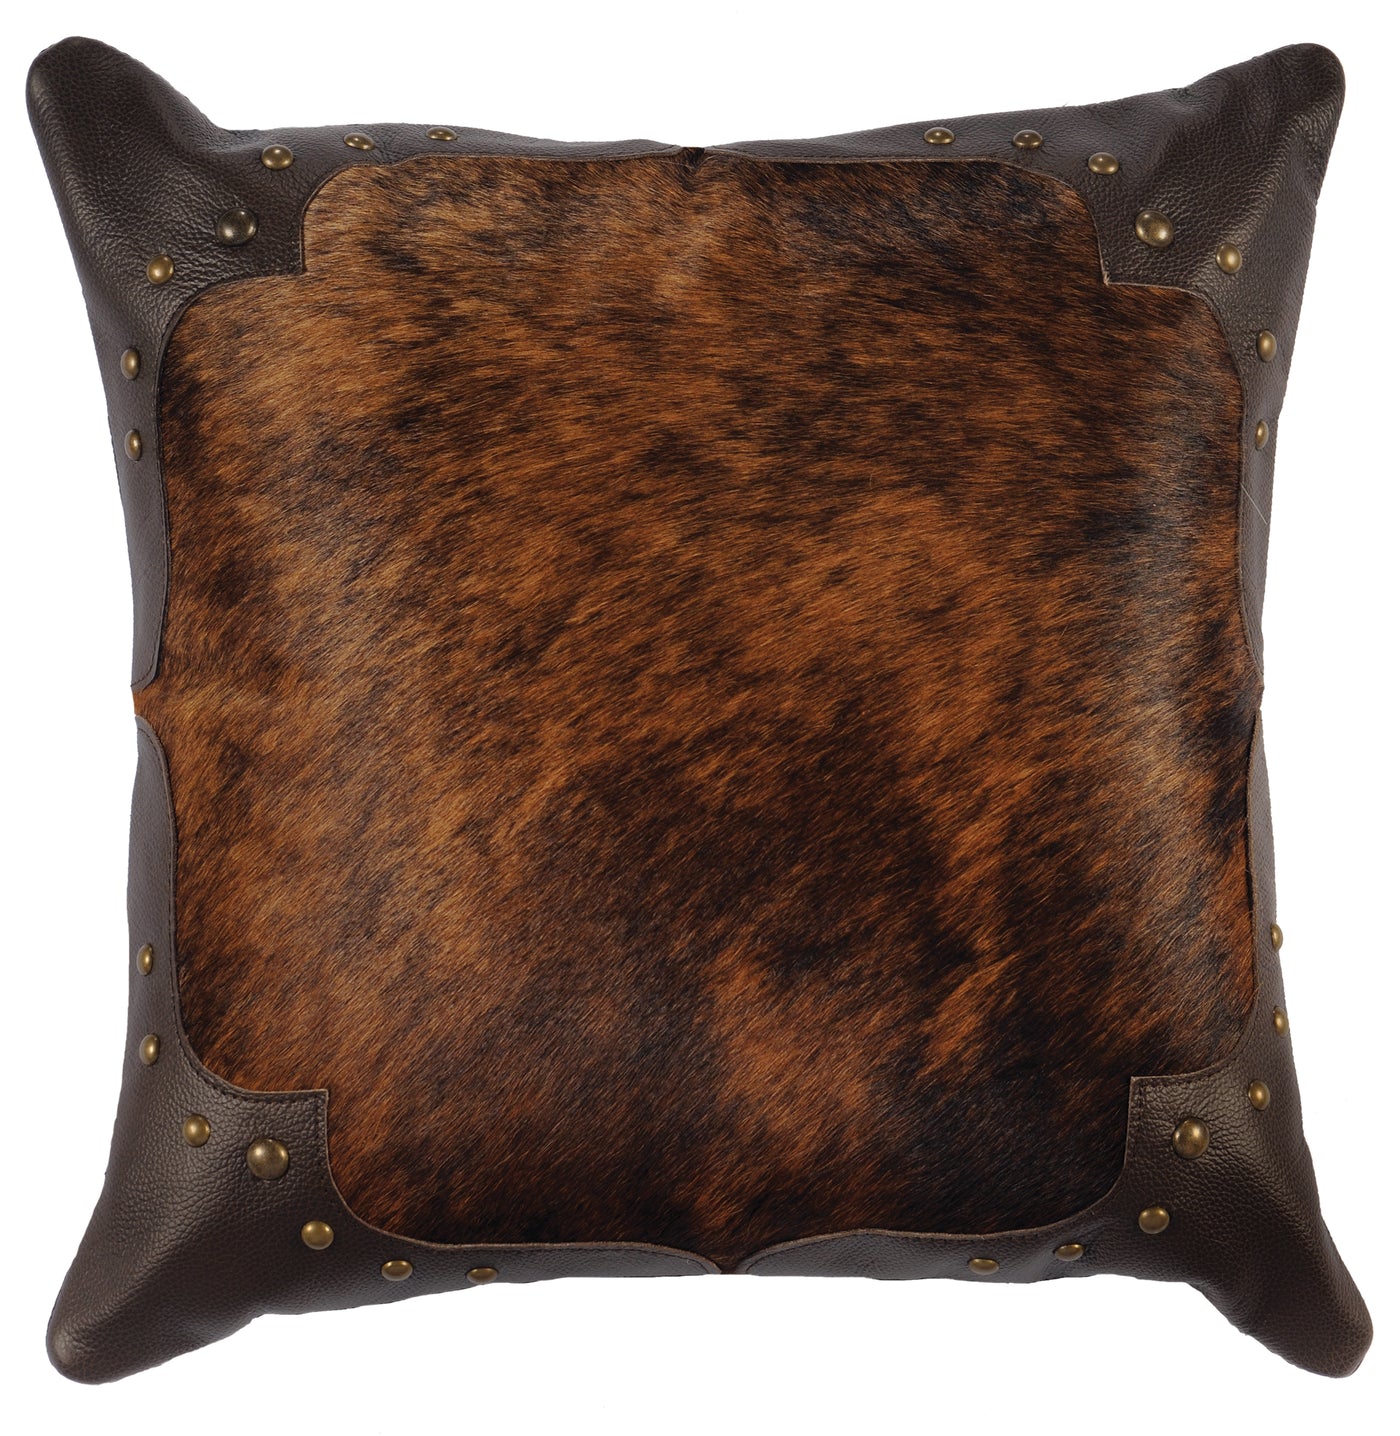 Canvello Dark Brindle Leather Pillow - Leather Back - 16" x 16"